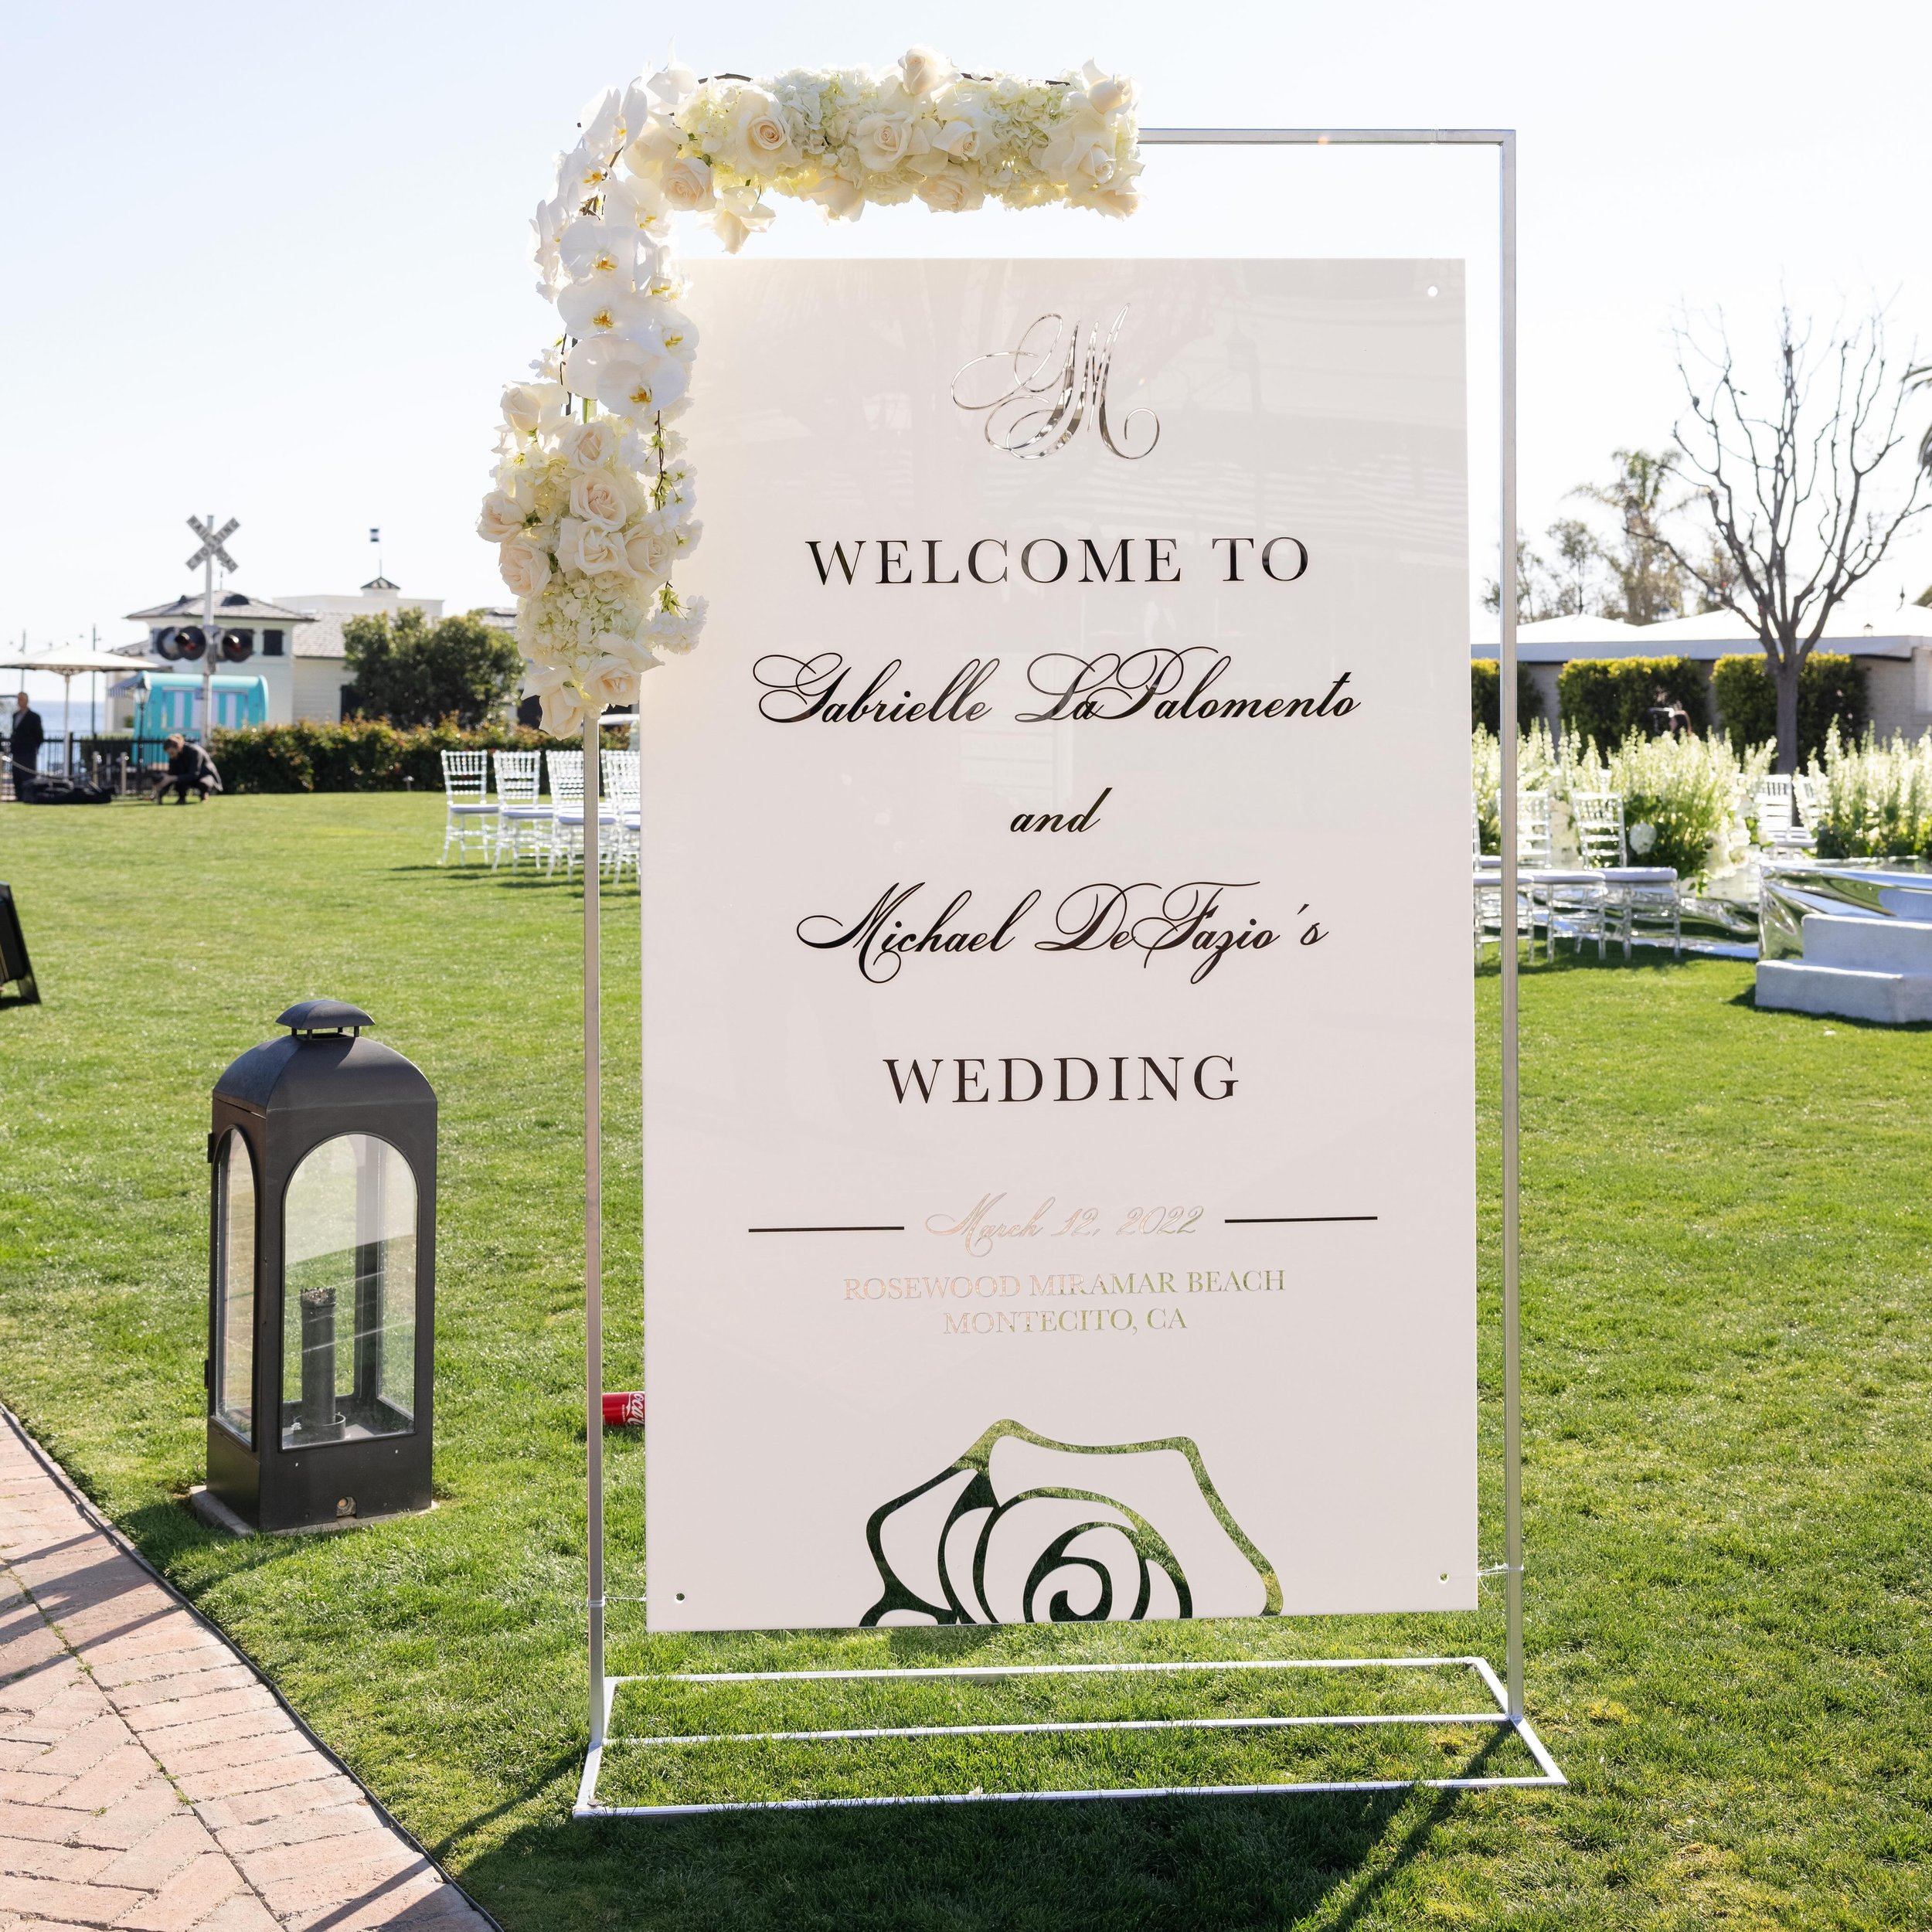 Even if you know the vision.. hire the Wedding Planner &amp; Designer

-

She is the key to helping you bring your vision to life!

Planning and Design: @sayidotodetails
Photo: @dukeimages
Florist: @nisiesenchanted
Venue: @rosewoodmirarbeach
Video:@h